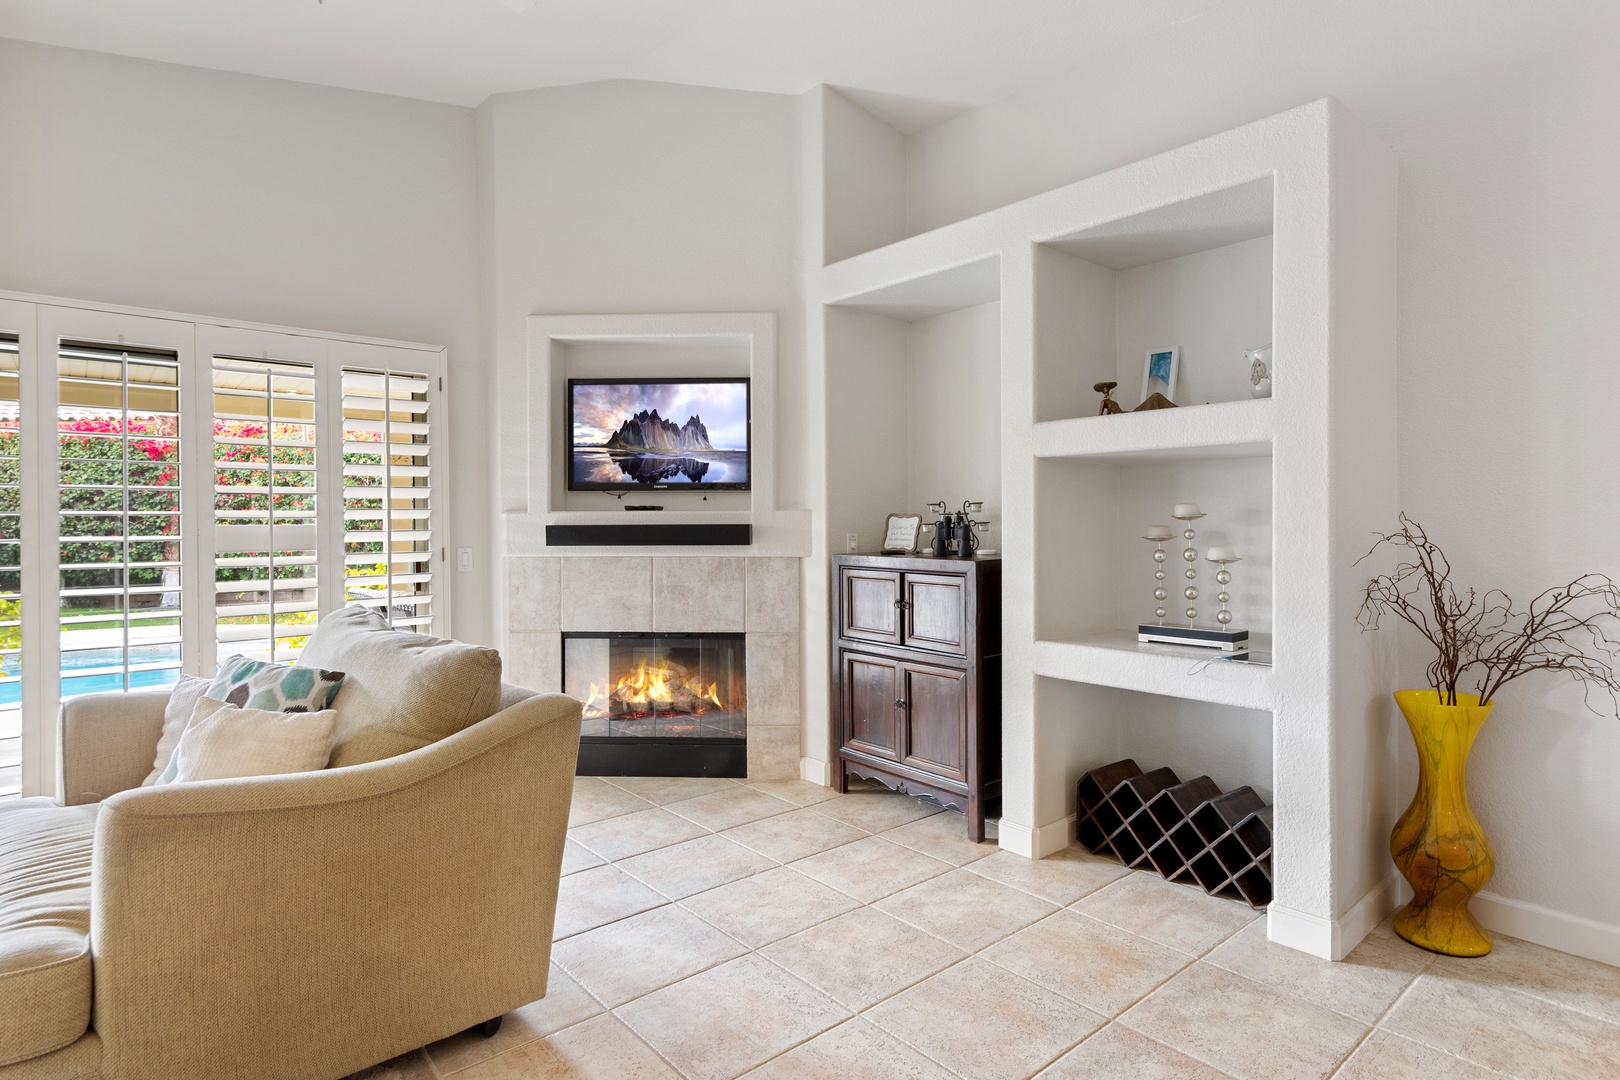 Living room with fireplace and SmartTV